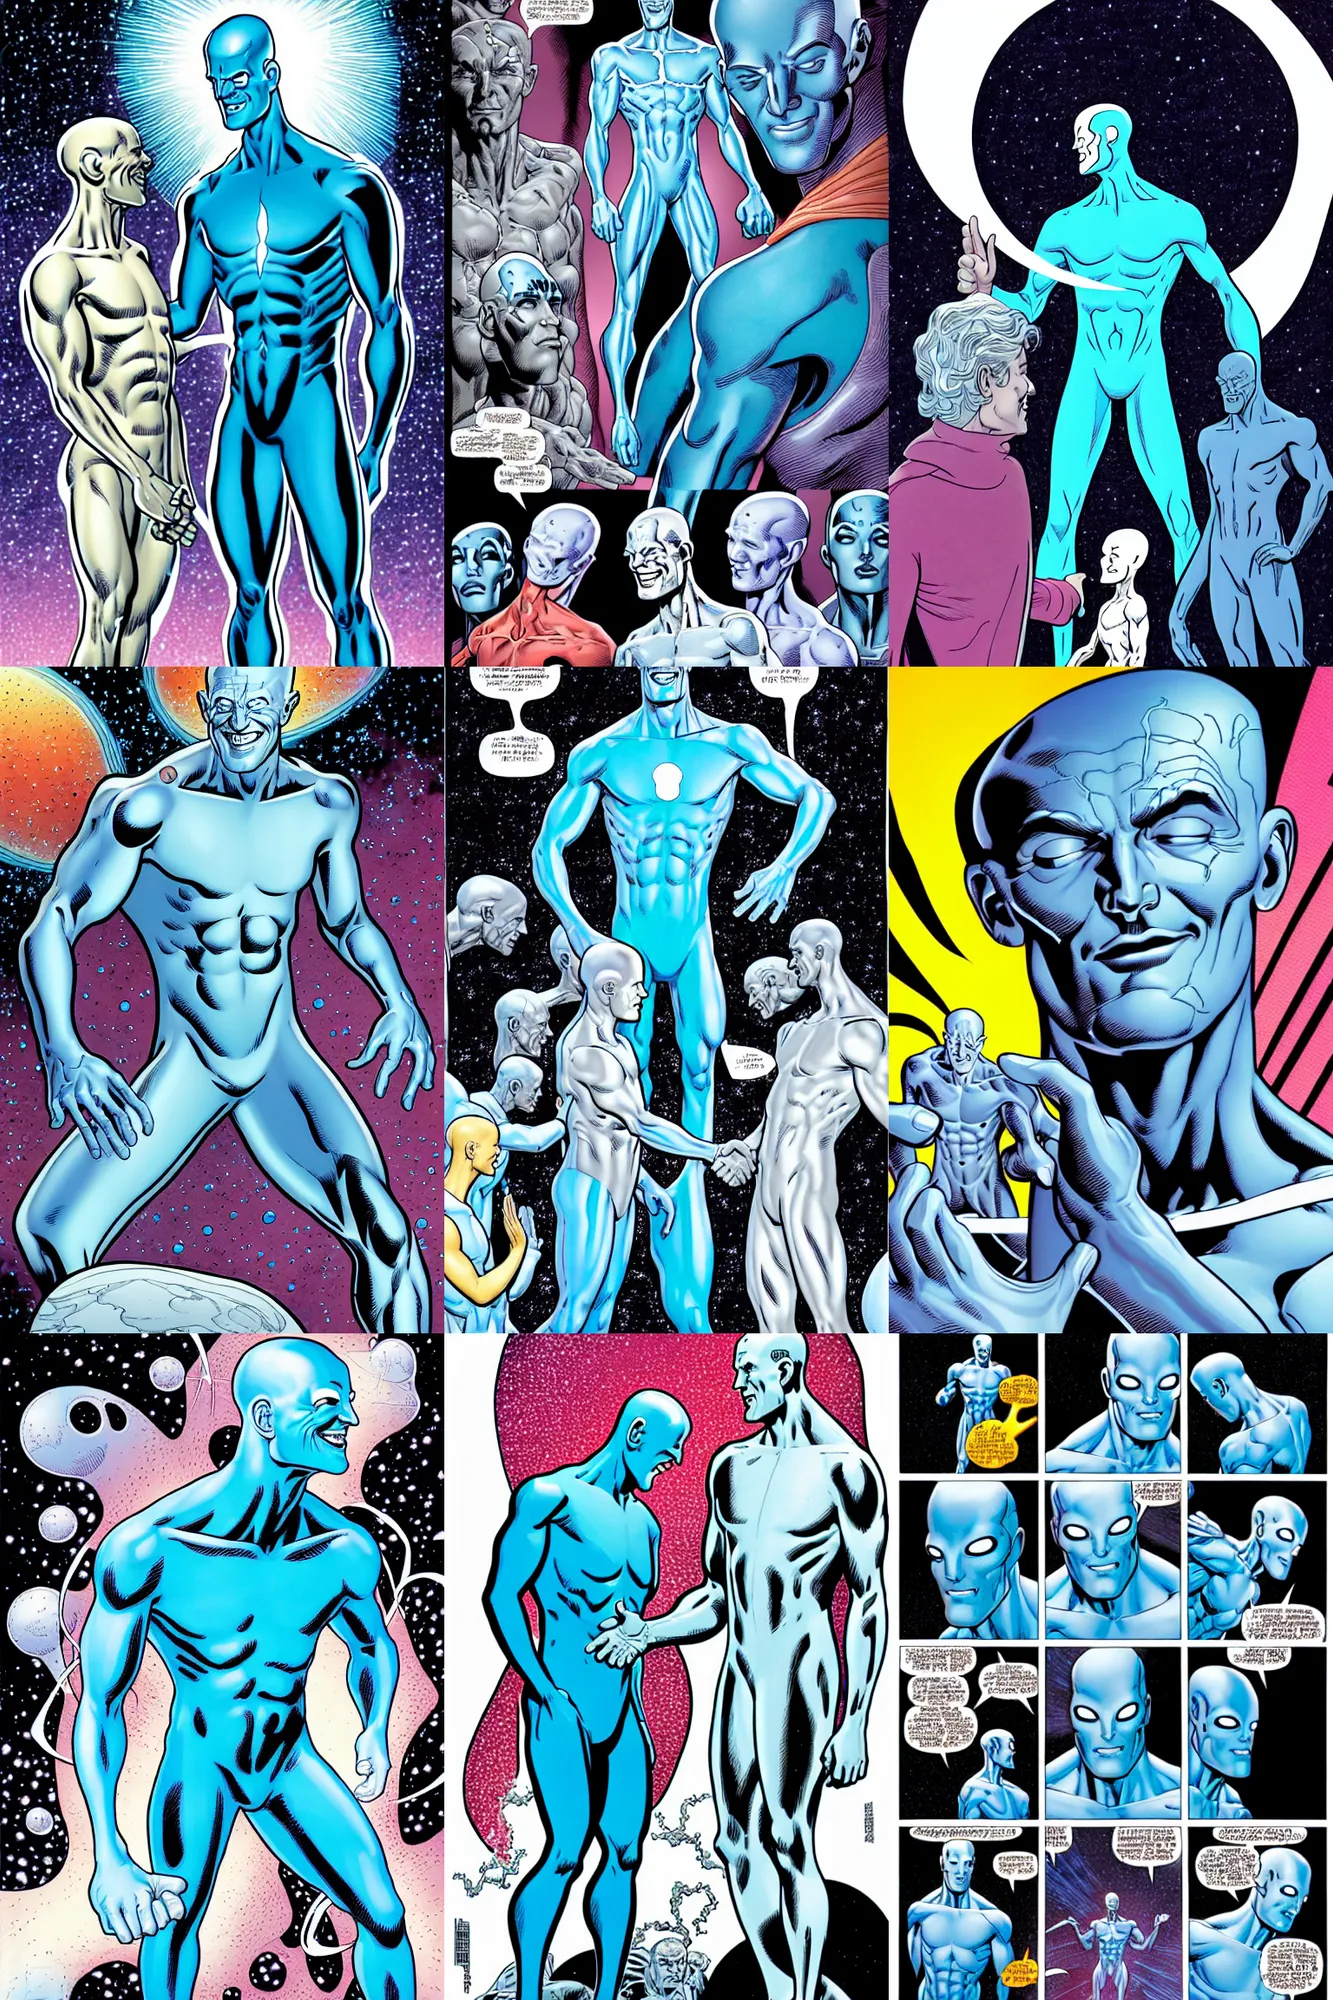 Prompt: silver surfer meets dr manhattan, shaking hands for public relations photo, smiling into the camera, illustrated by james jean